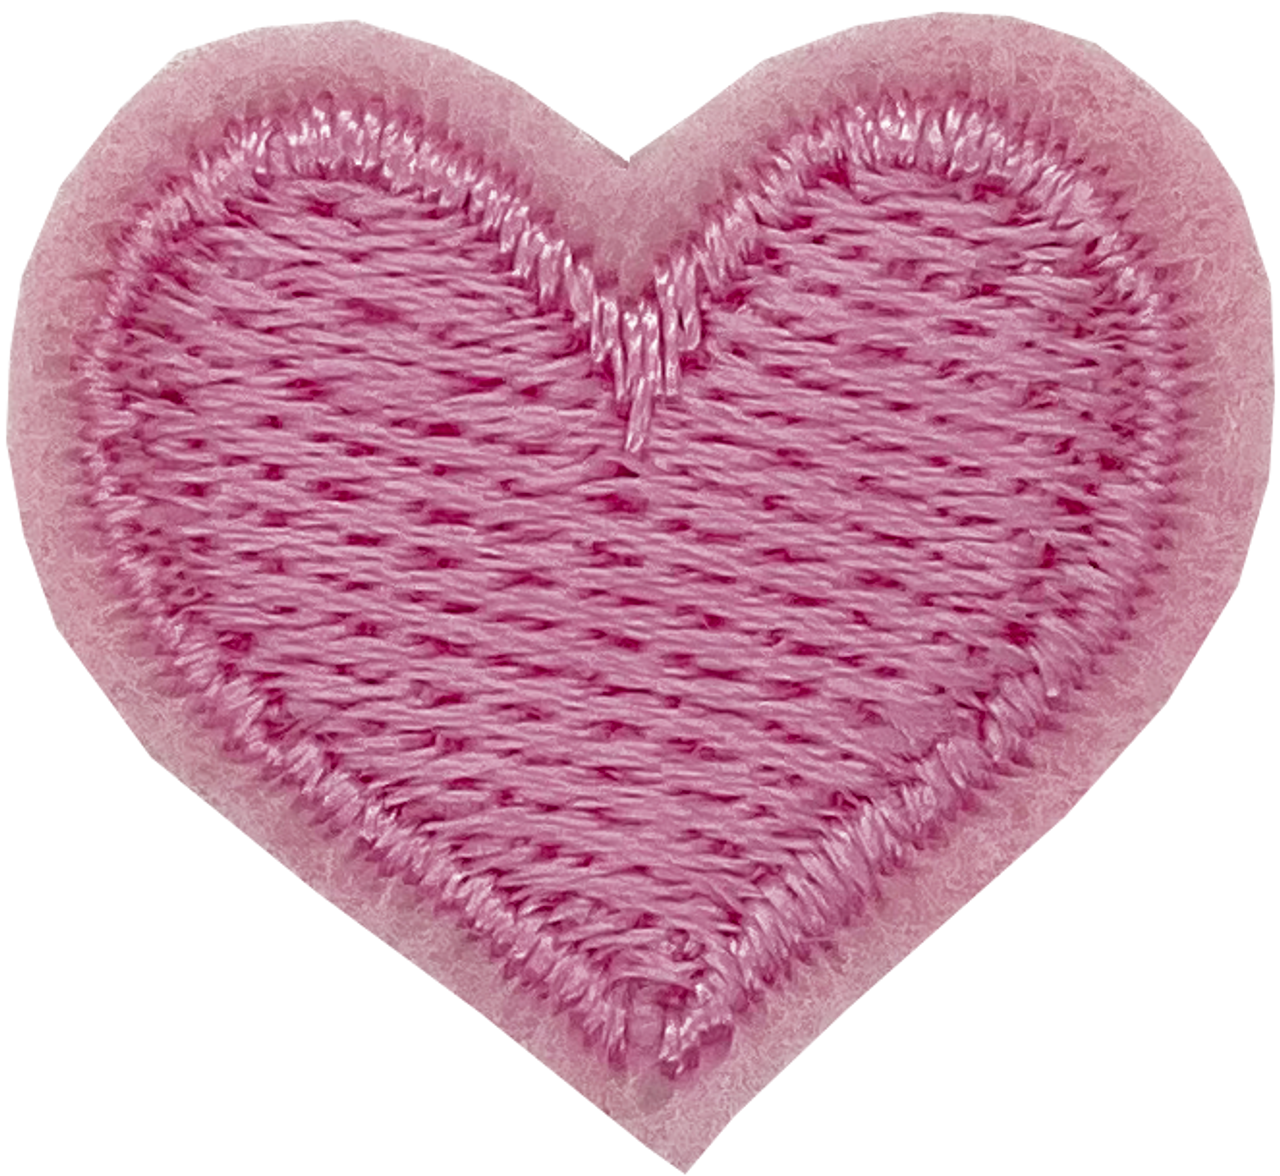 Heart Patches for Clothes Pink Heart Patches DIY Craft Heart Iron On  Patches Jacket – the best products in the Joom Geek online store